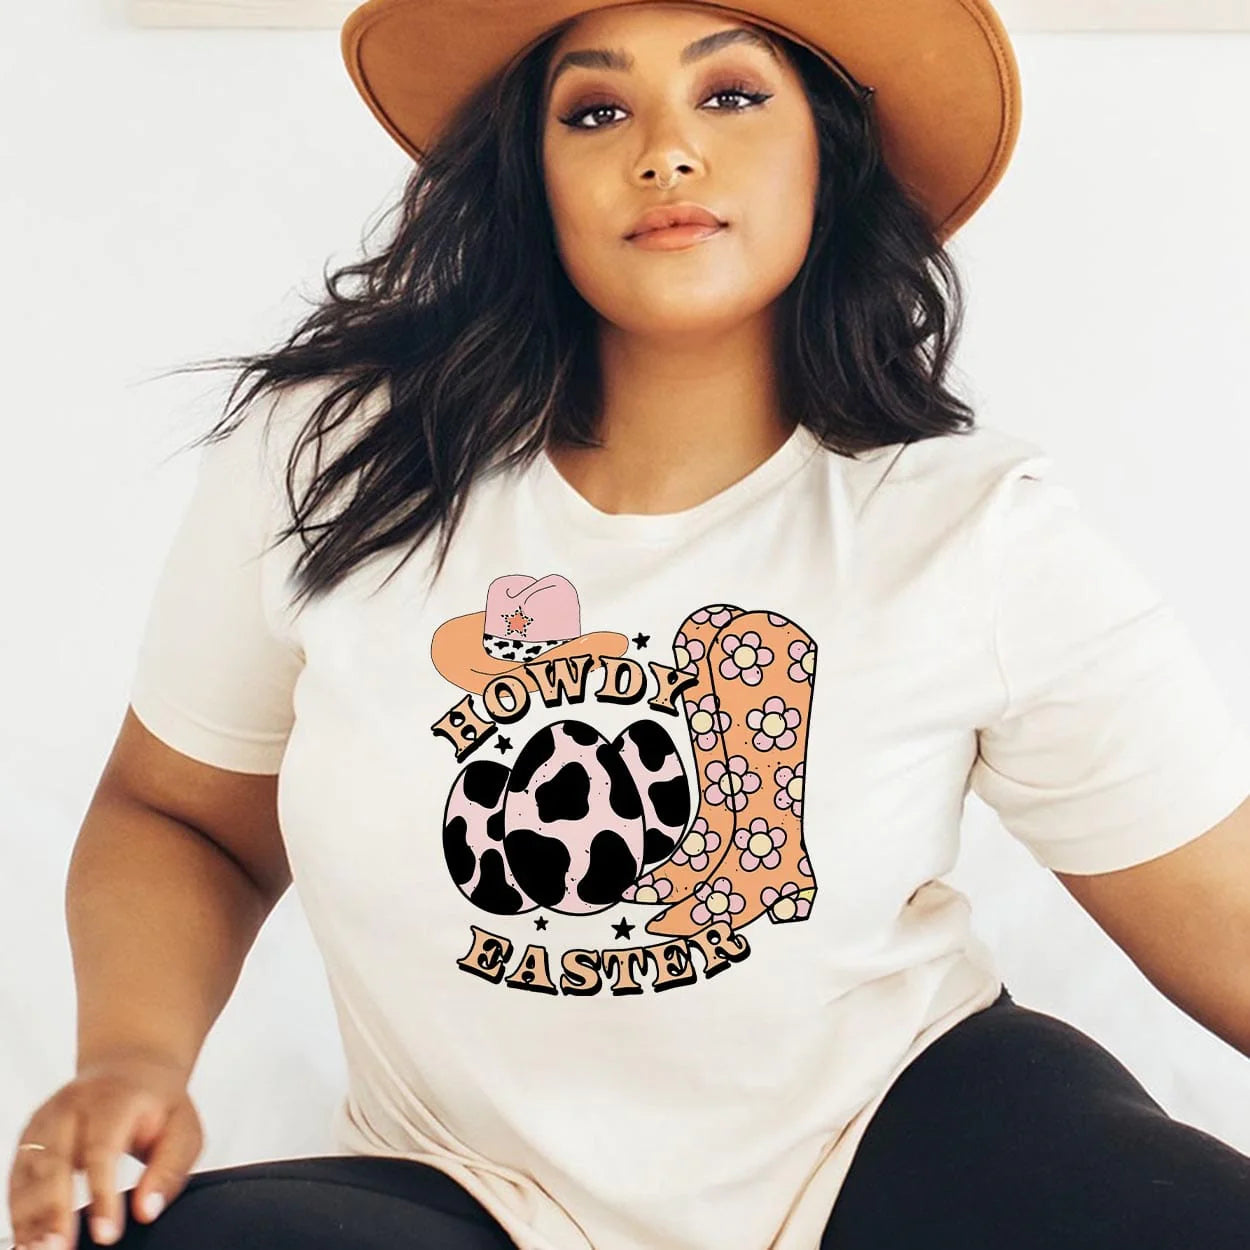 A cream colored short sleeve tee featuring 3 little cow print eggs, a pair of orange floral boots to the right, and a cowboy hat with pink, cow print, and orange above the eggs. The words "Howdy Easter" are curved around the eggs with black little stars. Item is pictured on a plain white background.